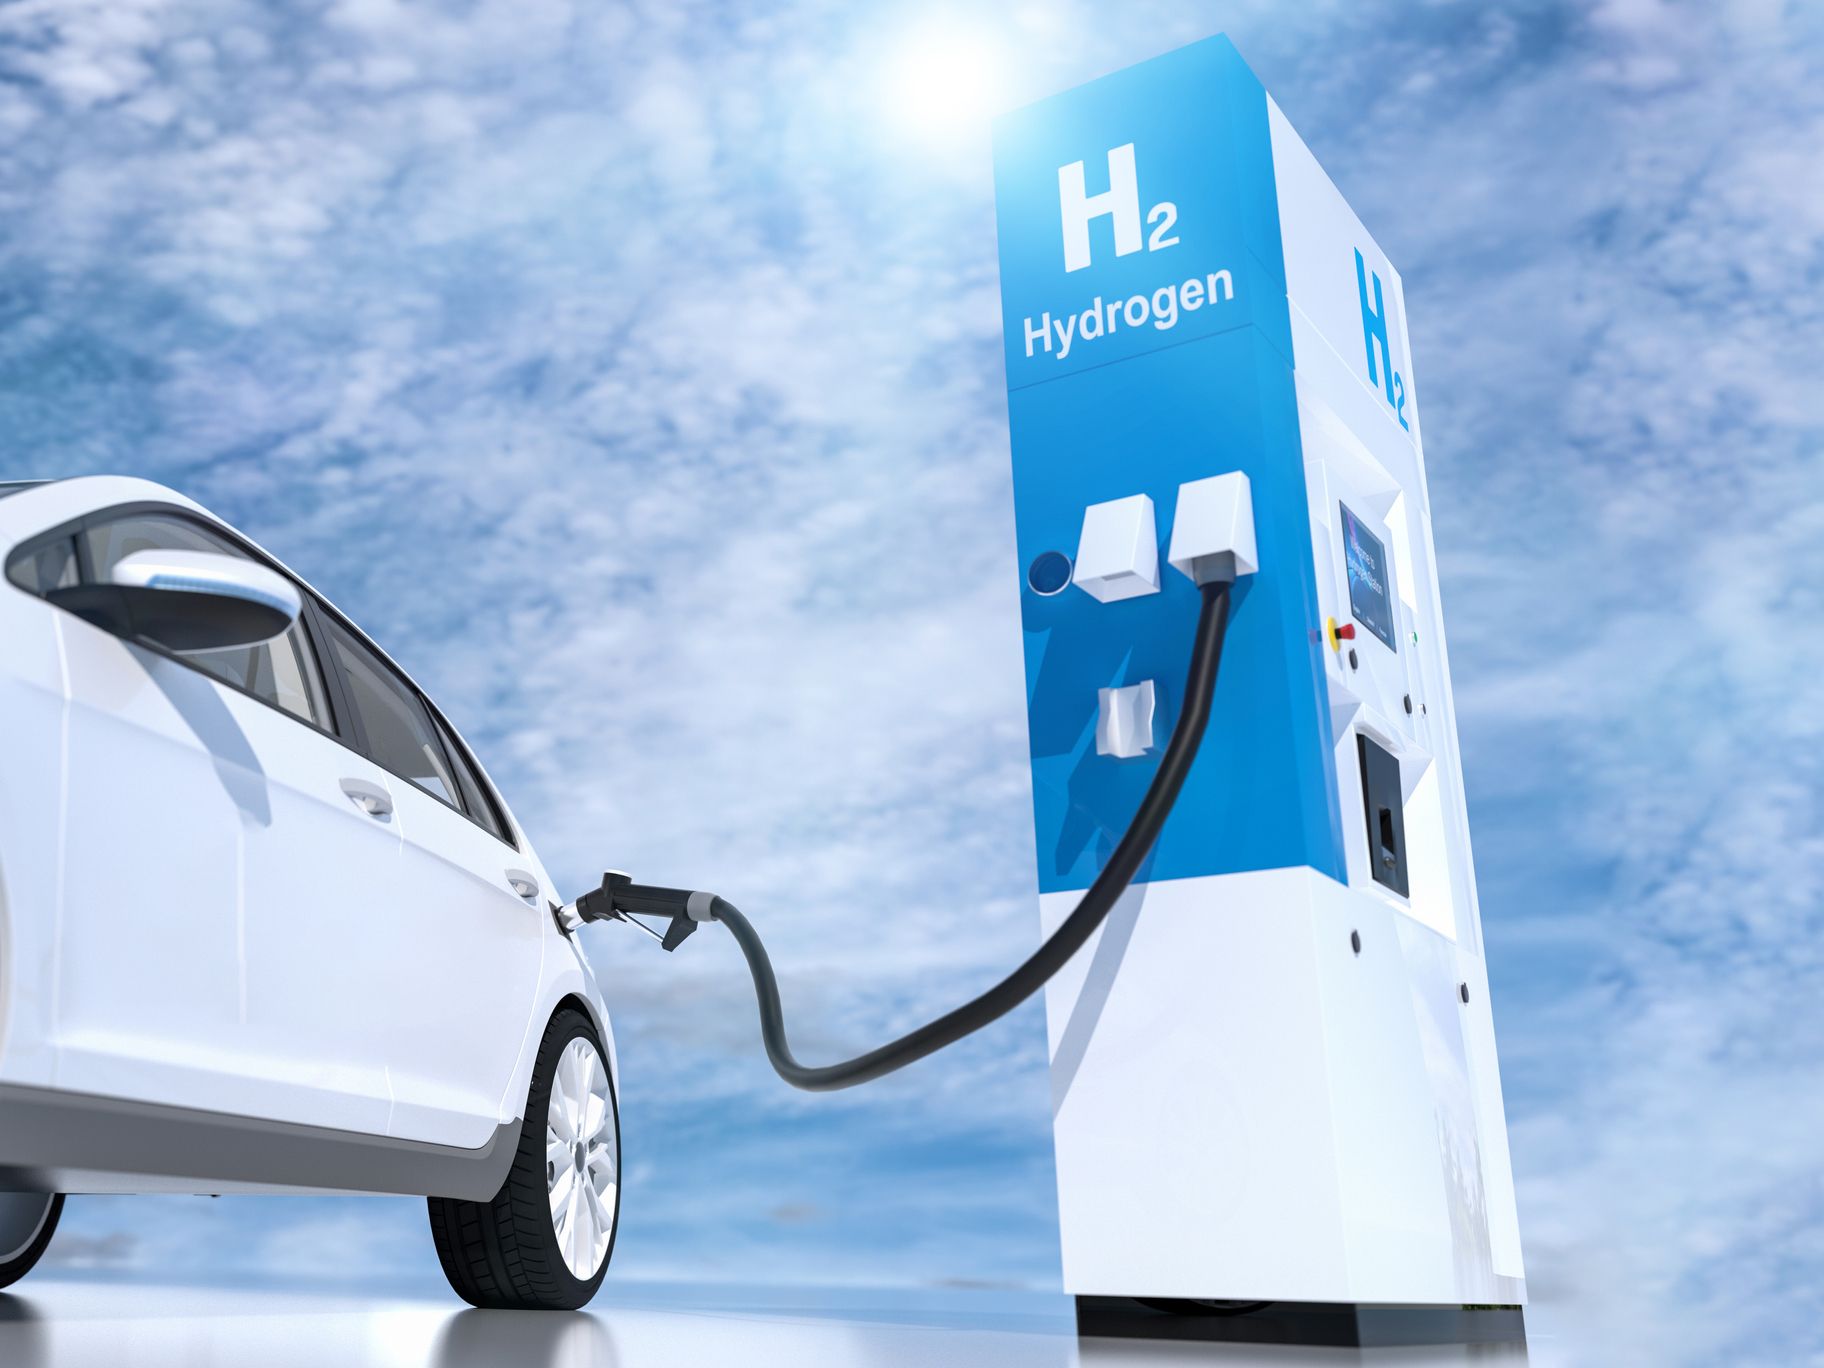 how hydrogen powered cars work